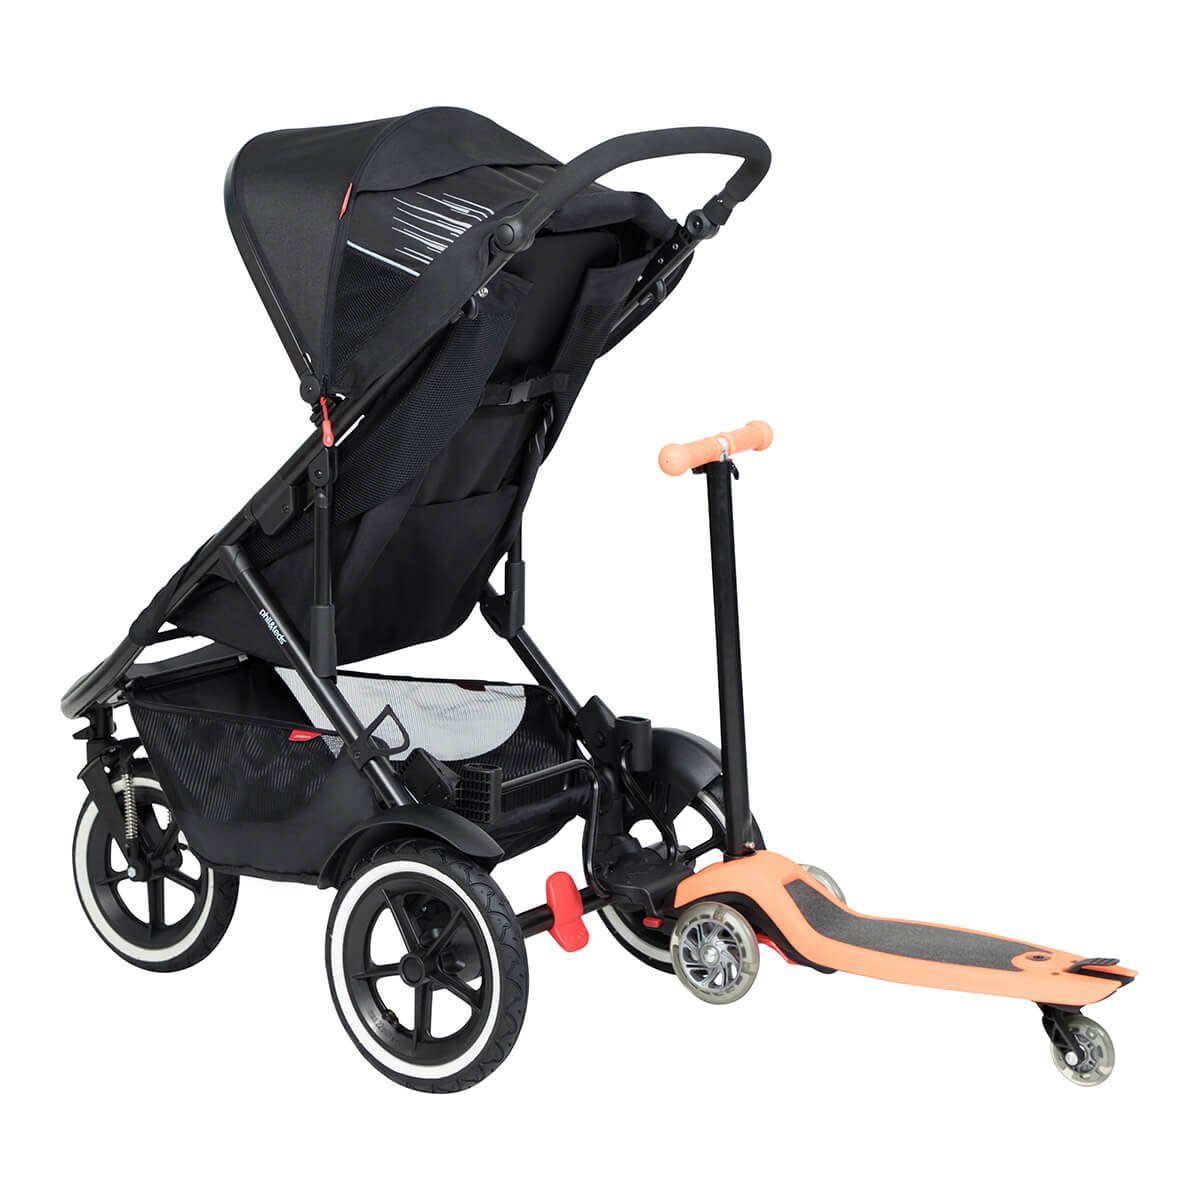 https://cdn.accentuate.io/4417291845666/19437753860274/philteds-sport-buggy-with-freerider-stroller-board-in-rear-v1626482862392.jpg?1200x1200